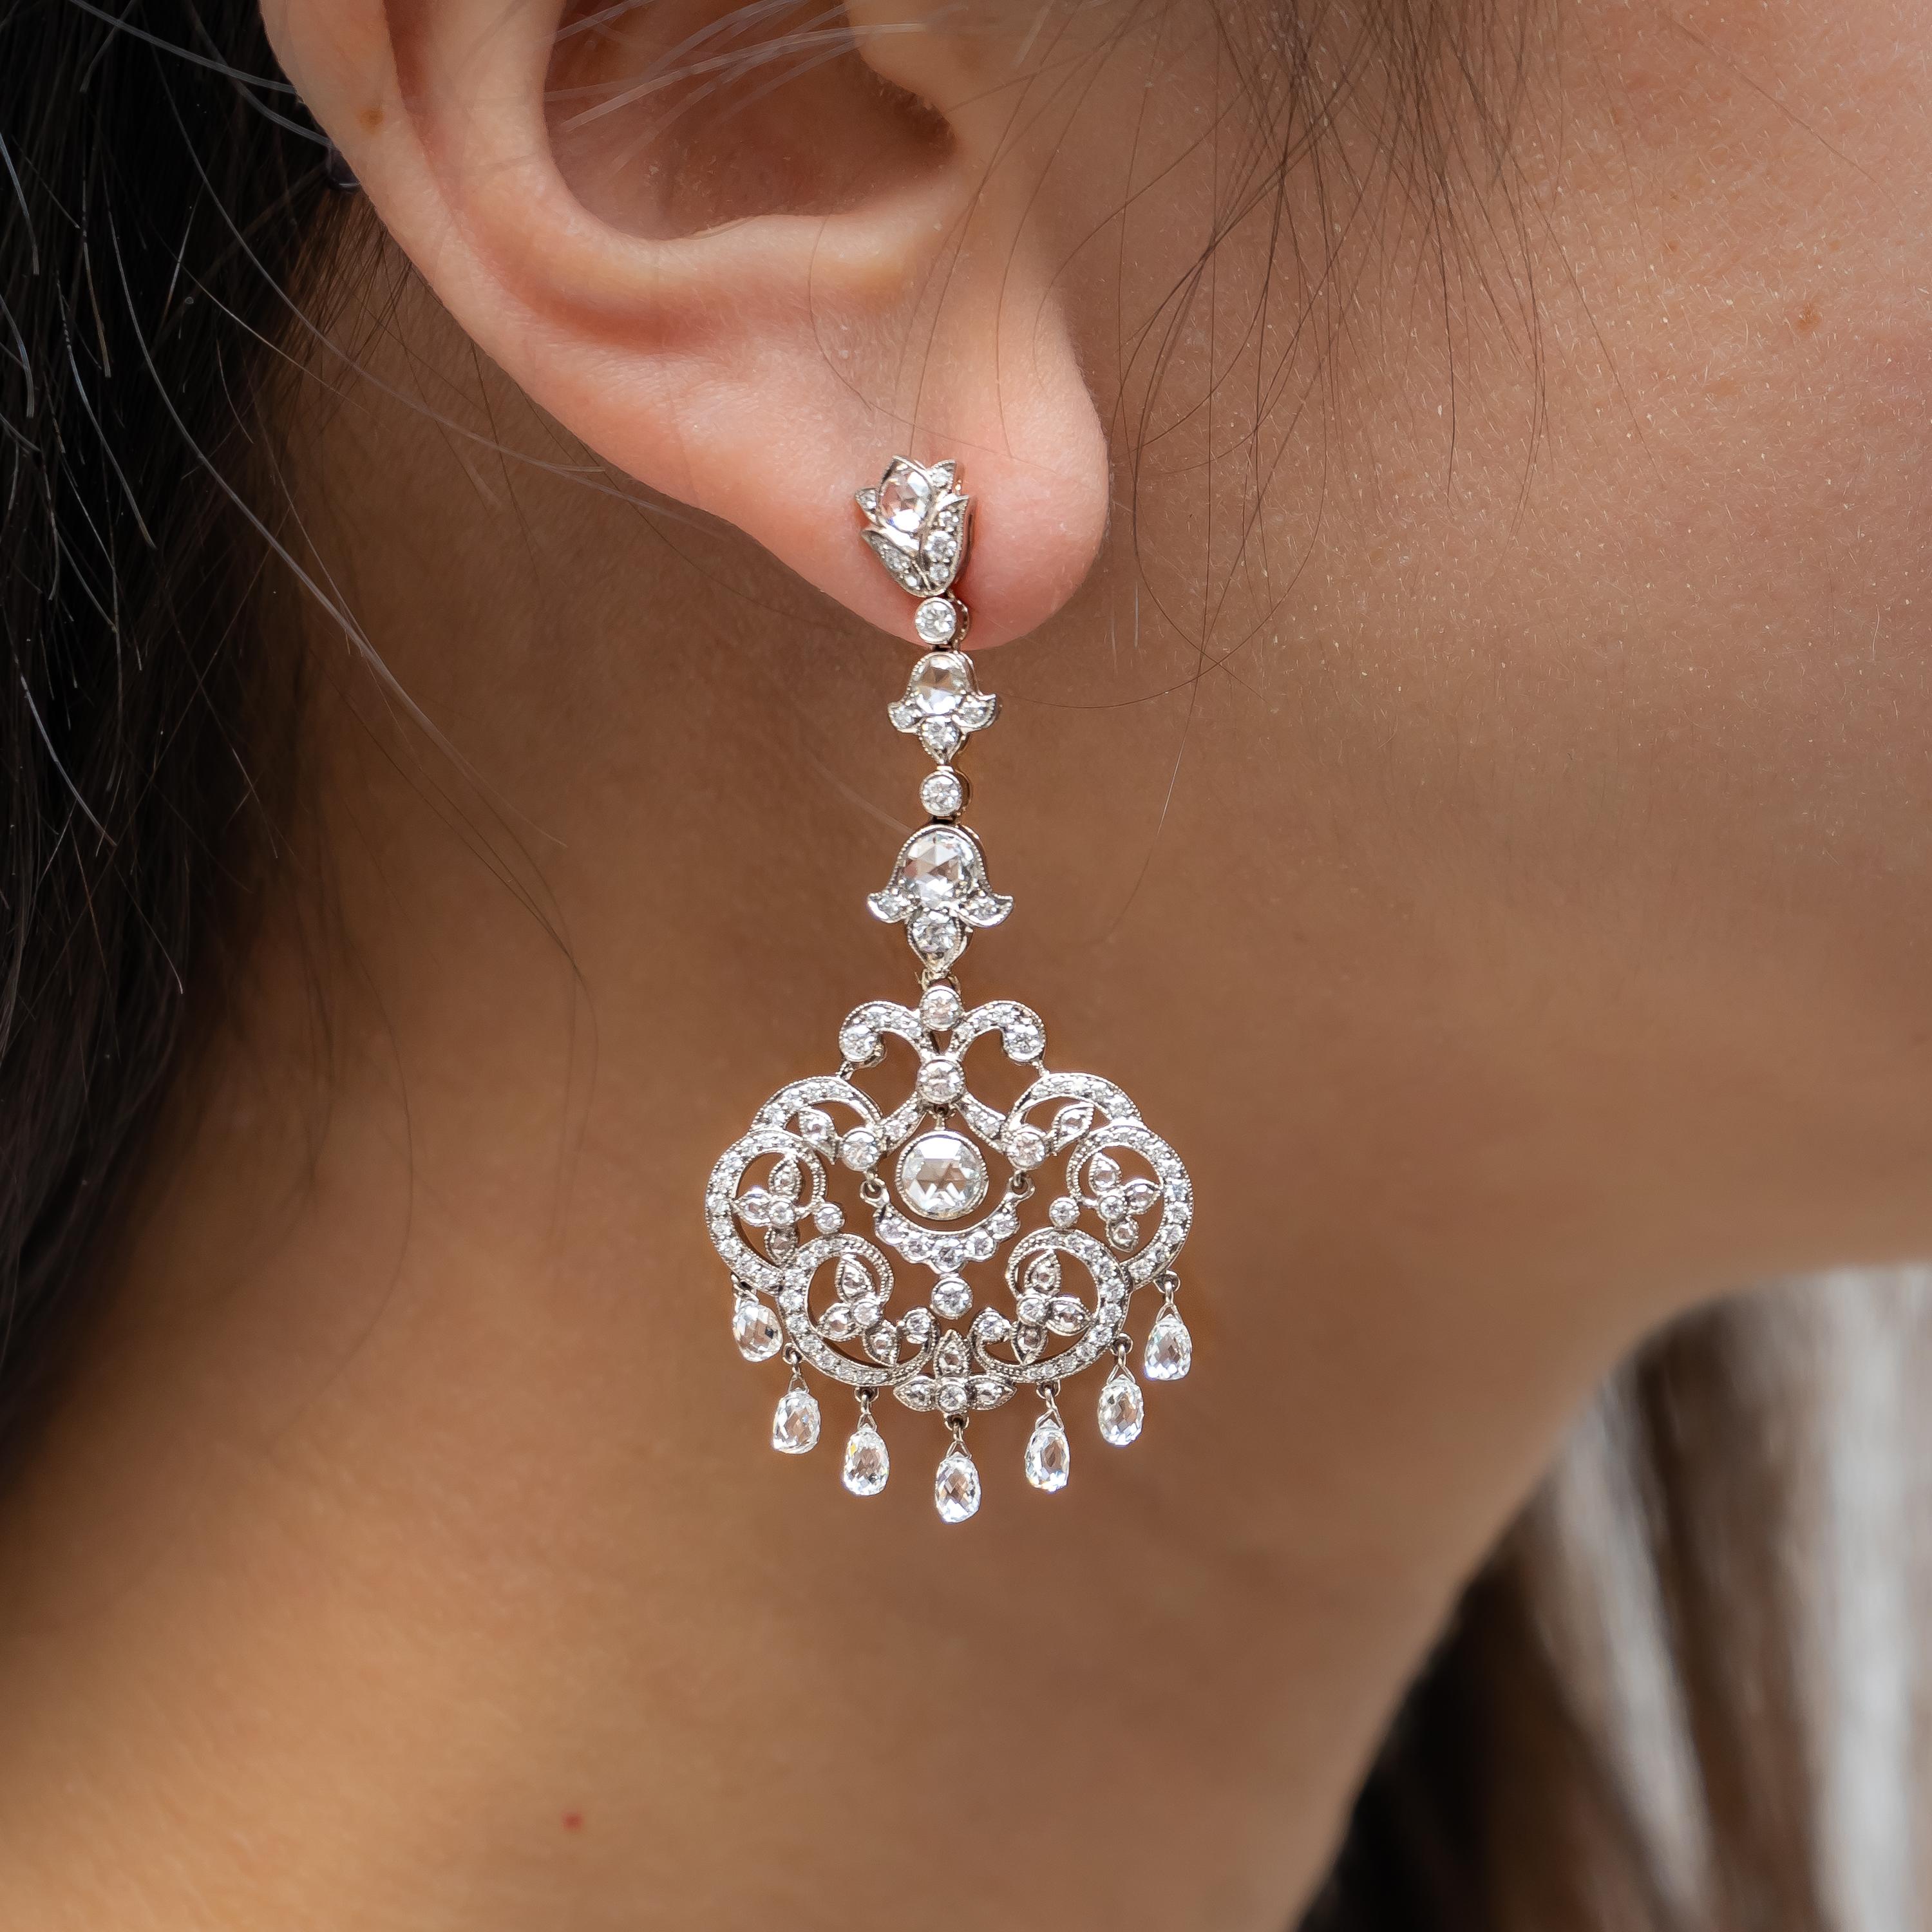 A pair of diamond drop earrings, with an openwork scrolled frame, with trefoil flowers, set with round brilliant-cut and rose-cut diamonds, each suspending seven briolette-cut diamonds, mounted in 18ct white gold, with a total diamond weight of